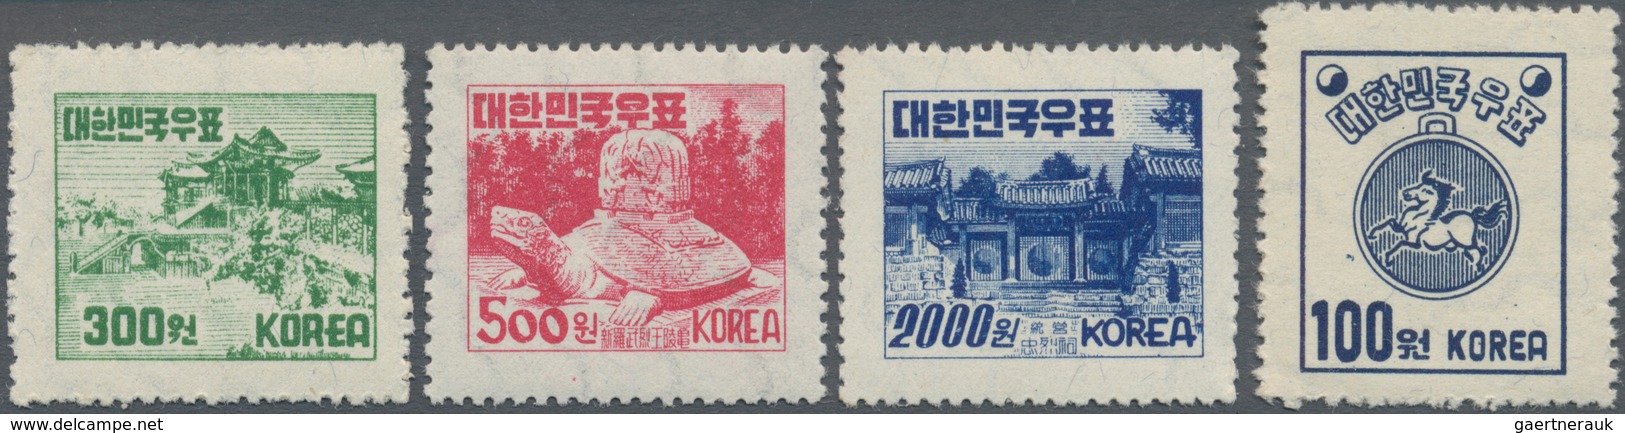 Korea-Süd: 1946/77, MNH but mainly mounted mint (inc. no gum as issued) and very few used on Minkus